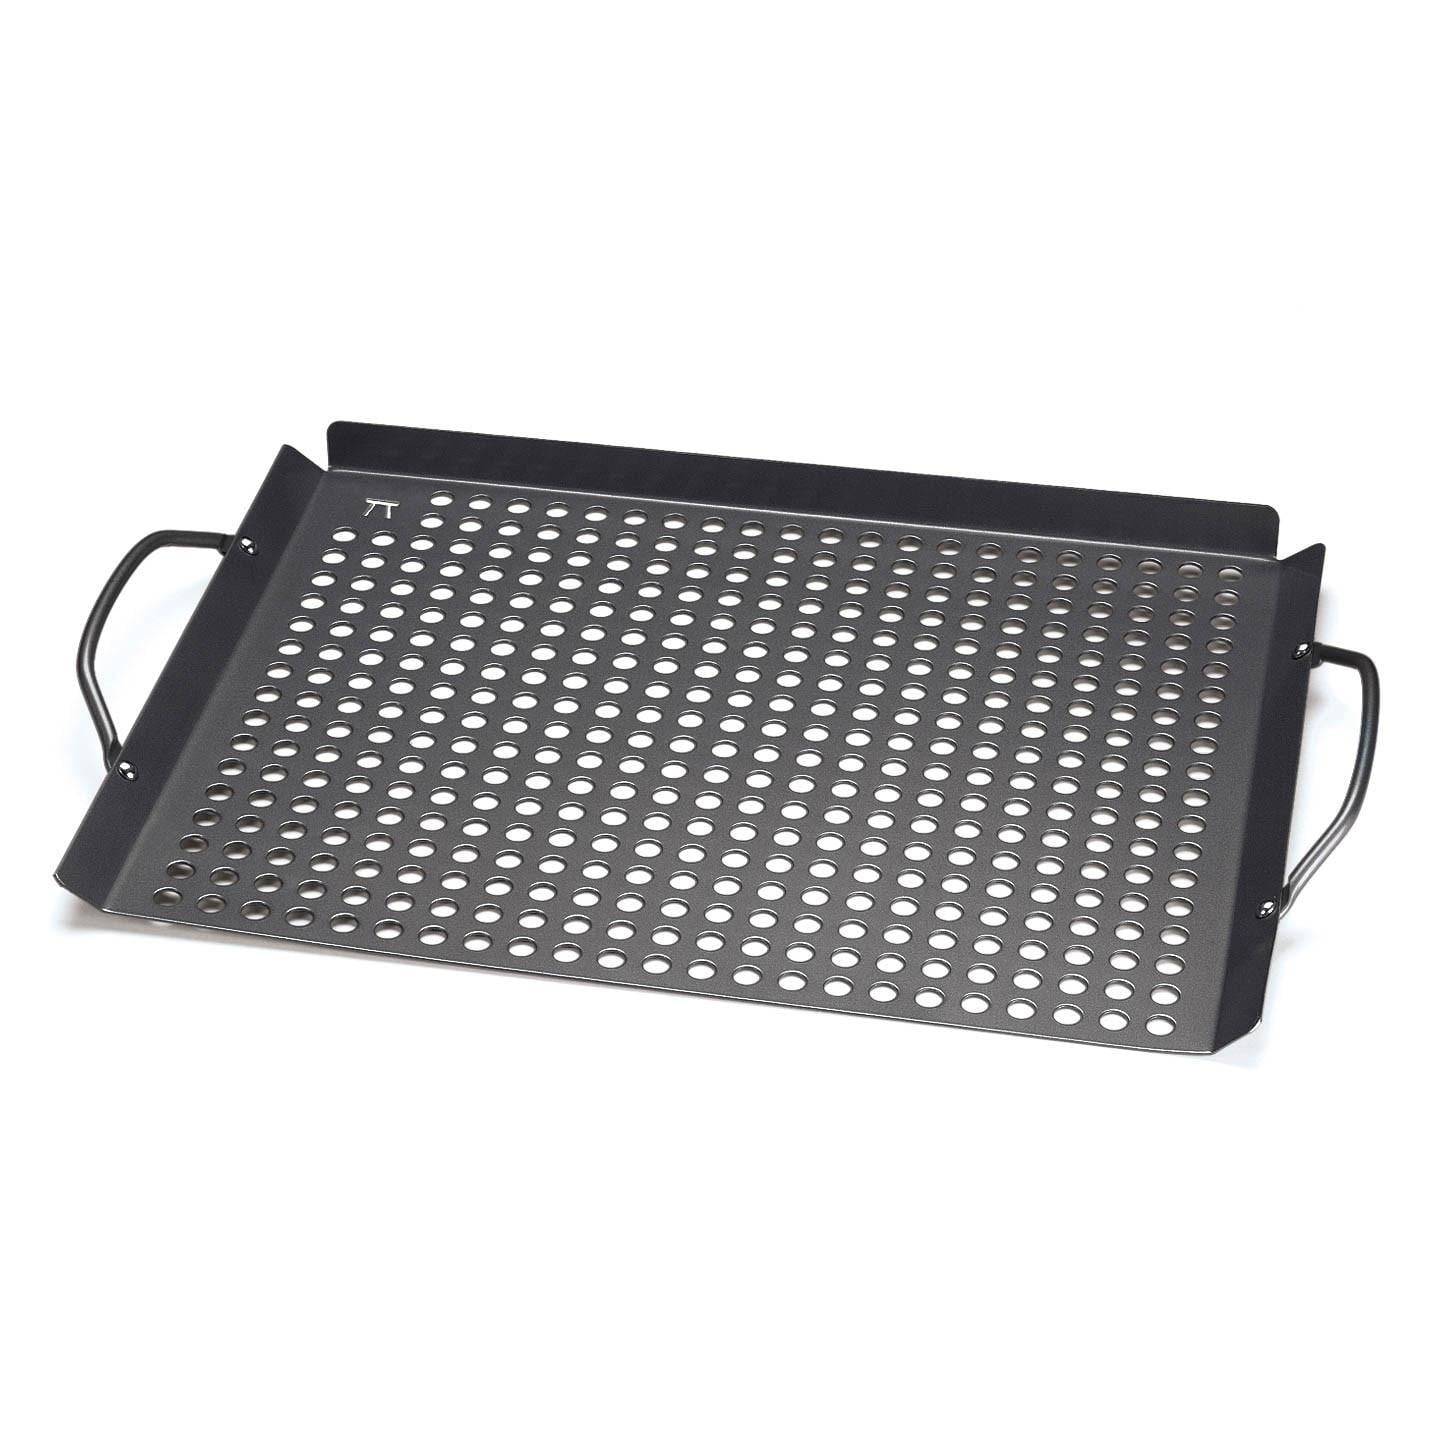 Outset® QD77 11 3/4 Diameter 3-in-1 Non-Stick Grill Basket and Skillet